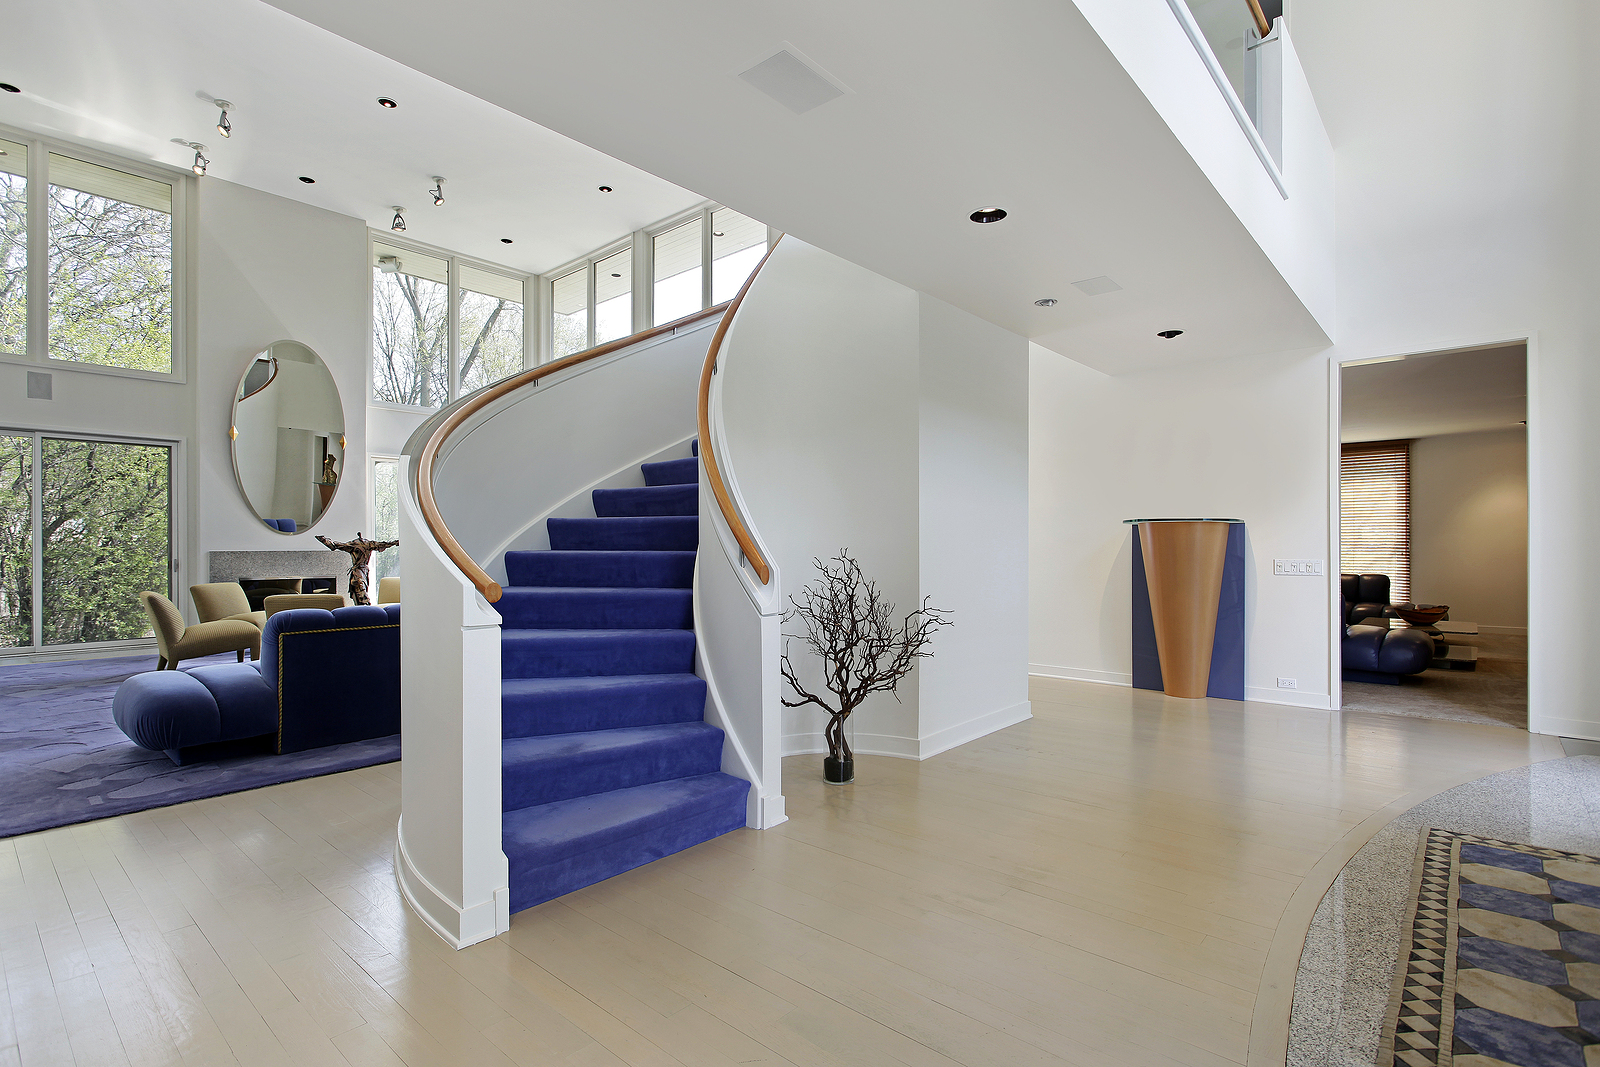 The best paint for stairs dos and donts before you buy